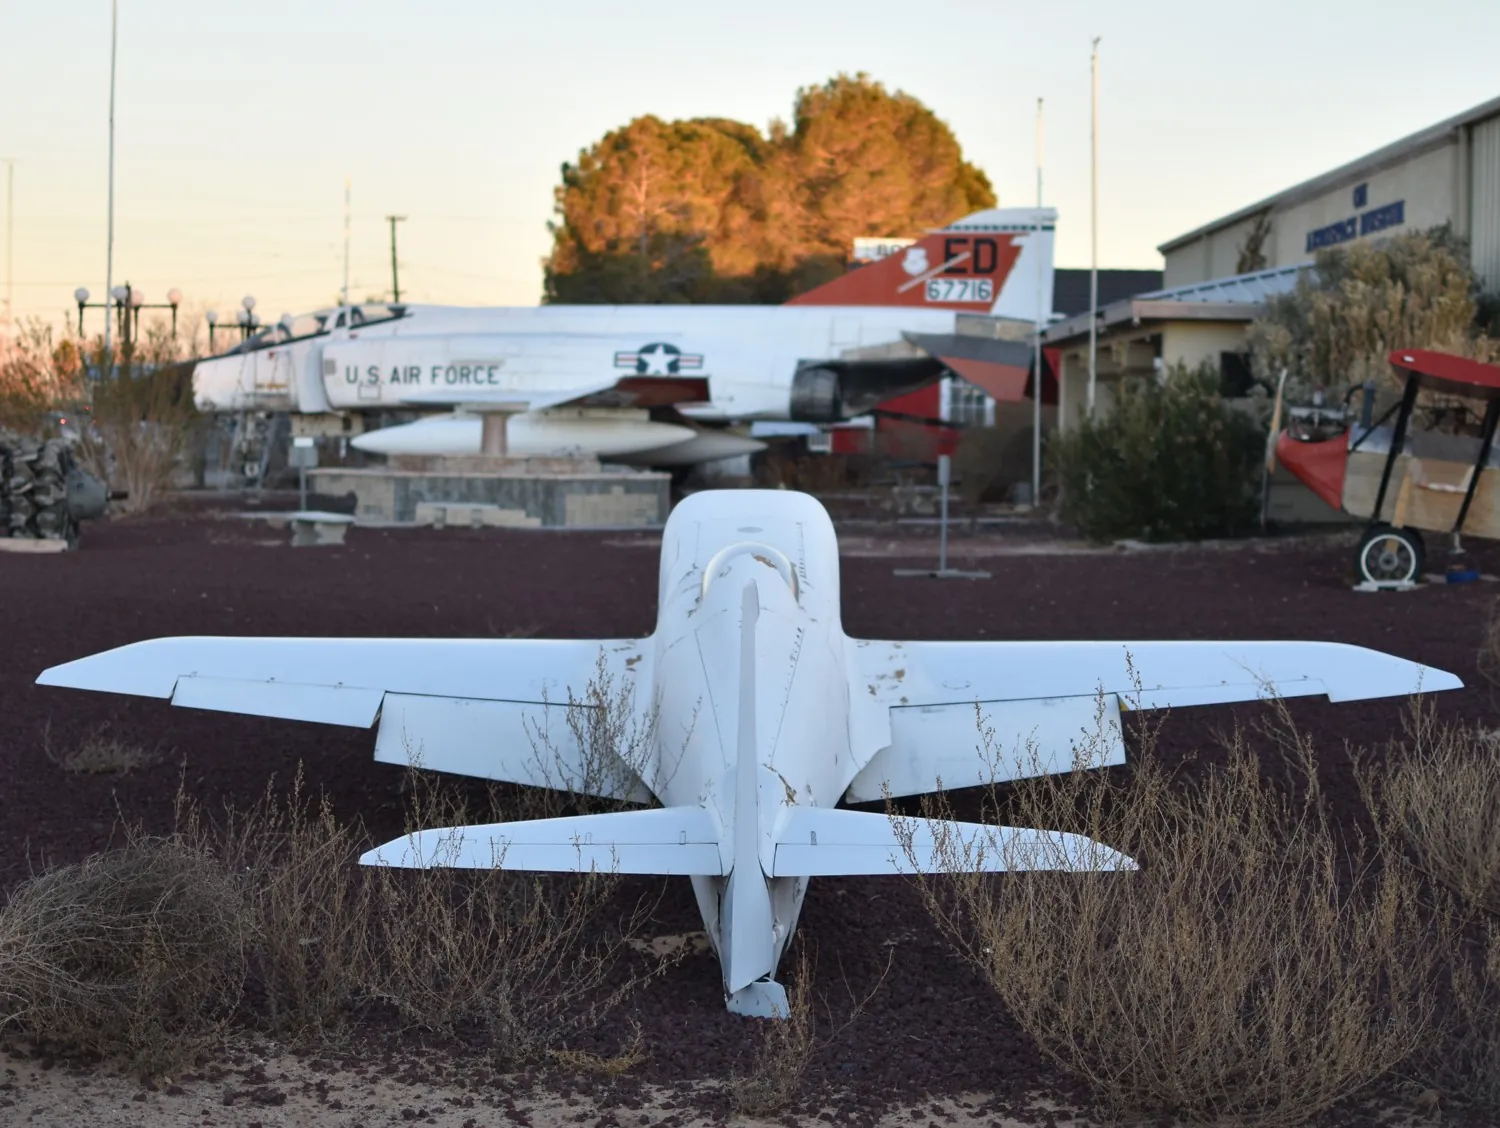 A small custom-made white jet parked on red gravel in front of the museum.